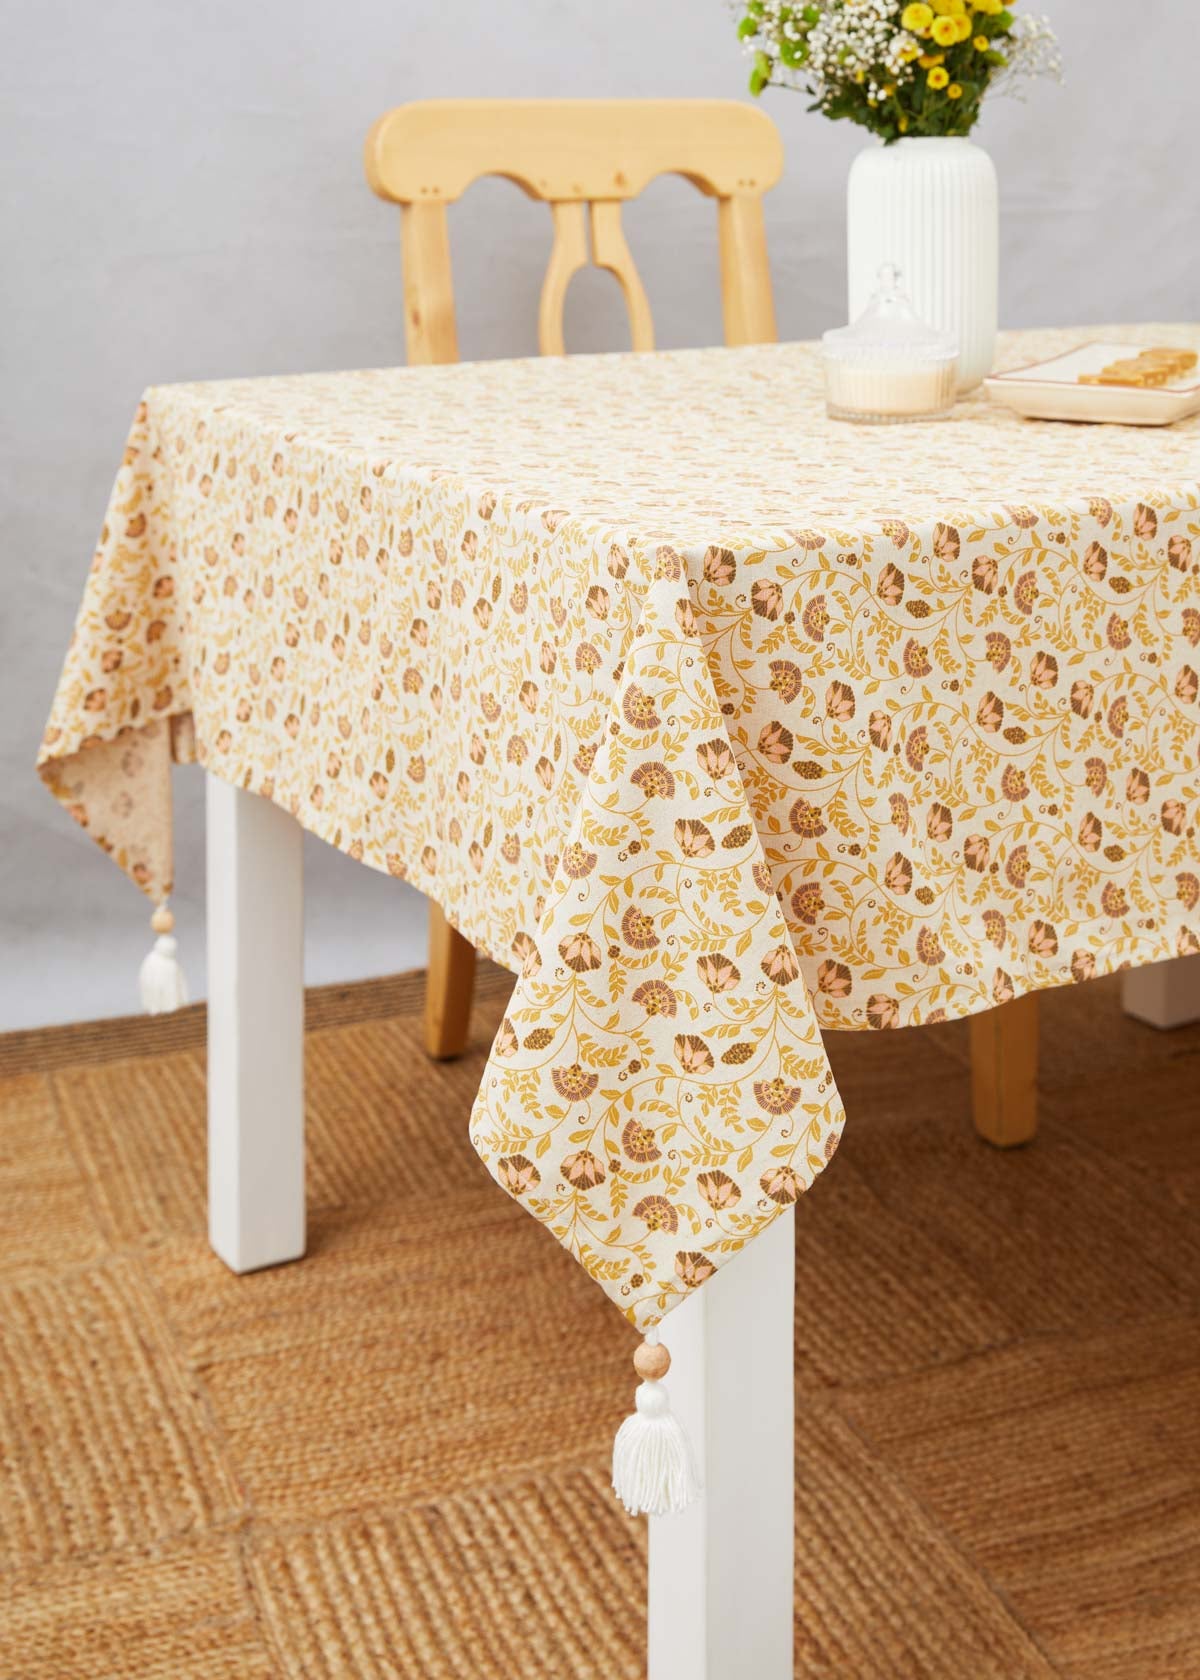 Calico Printed Cotton Table Cloth - Amber